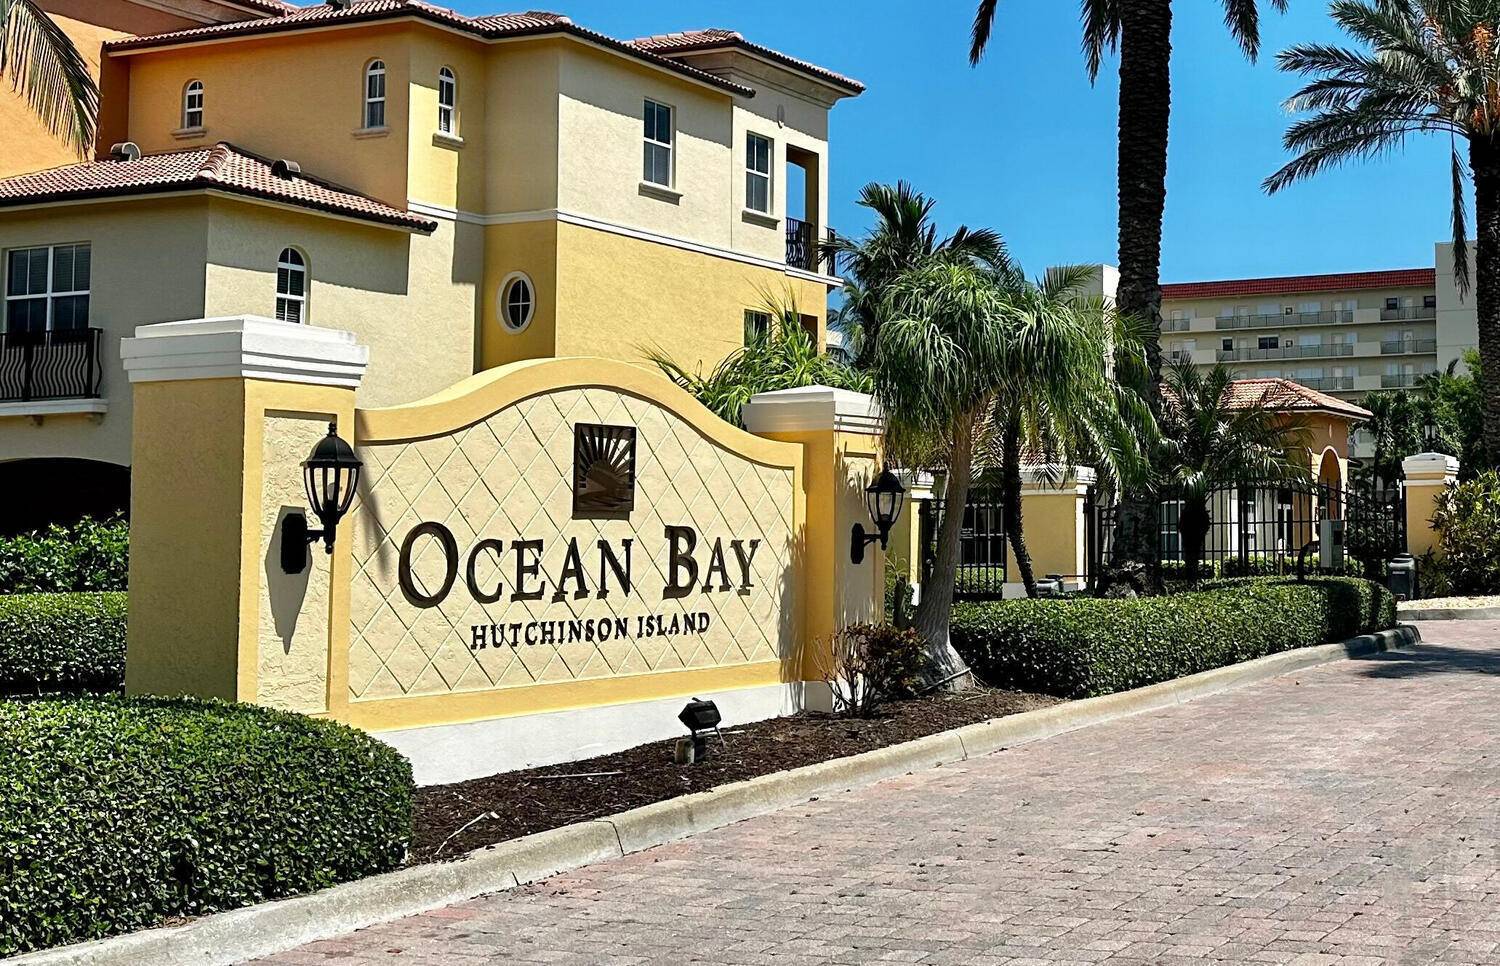 Beach House Opportunity, Price slashed to 750, 000, Motivated Seller, Sparkling Clean 2, 400 sq ft of living area, 3 large bedrooms, 3 full baths, 2 Car Gar, PRIVATE ELEVATOR, ...